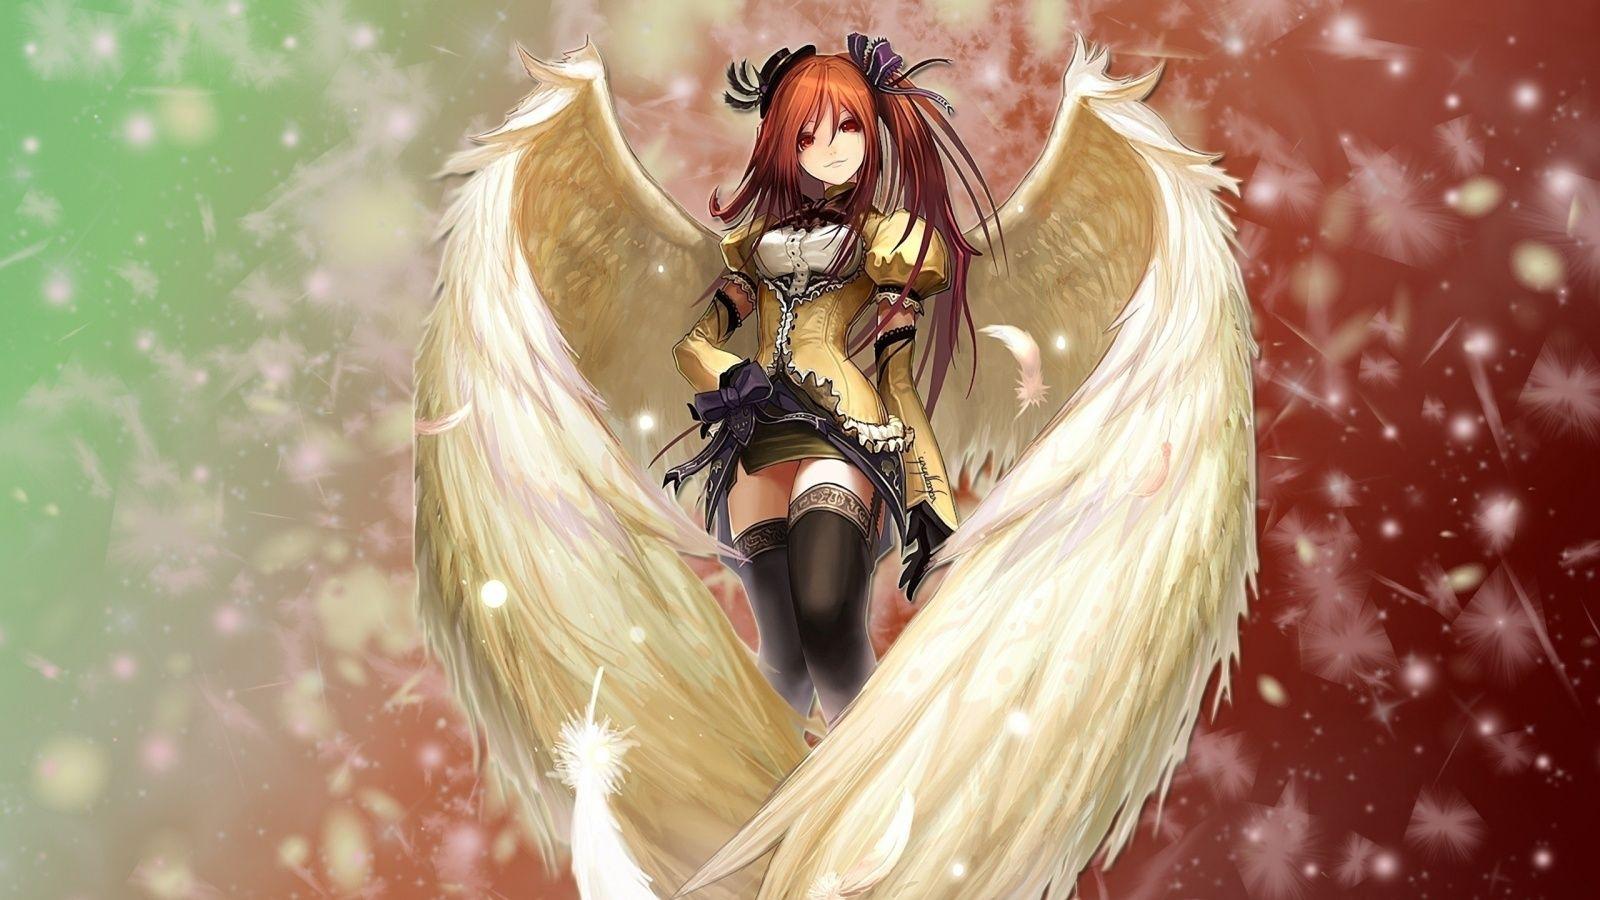 Anime Angels Wallpaper (68+ images)